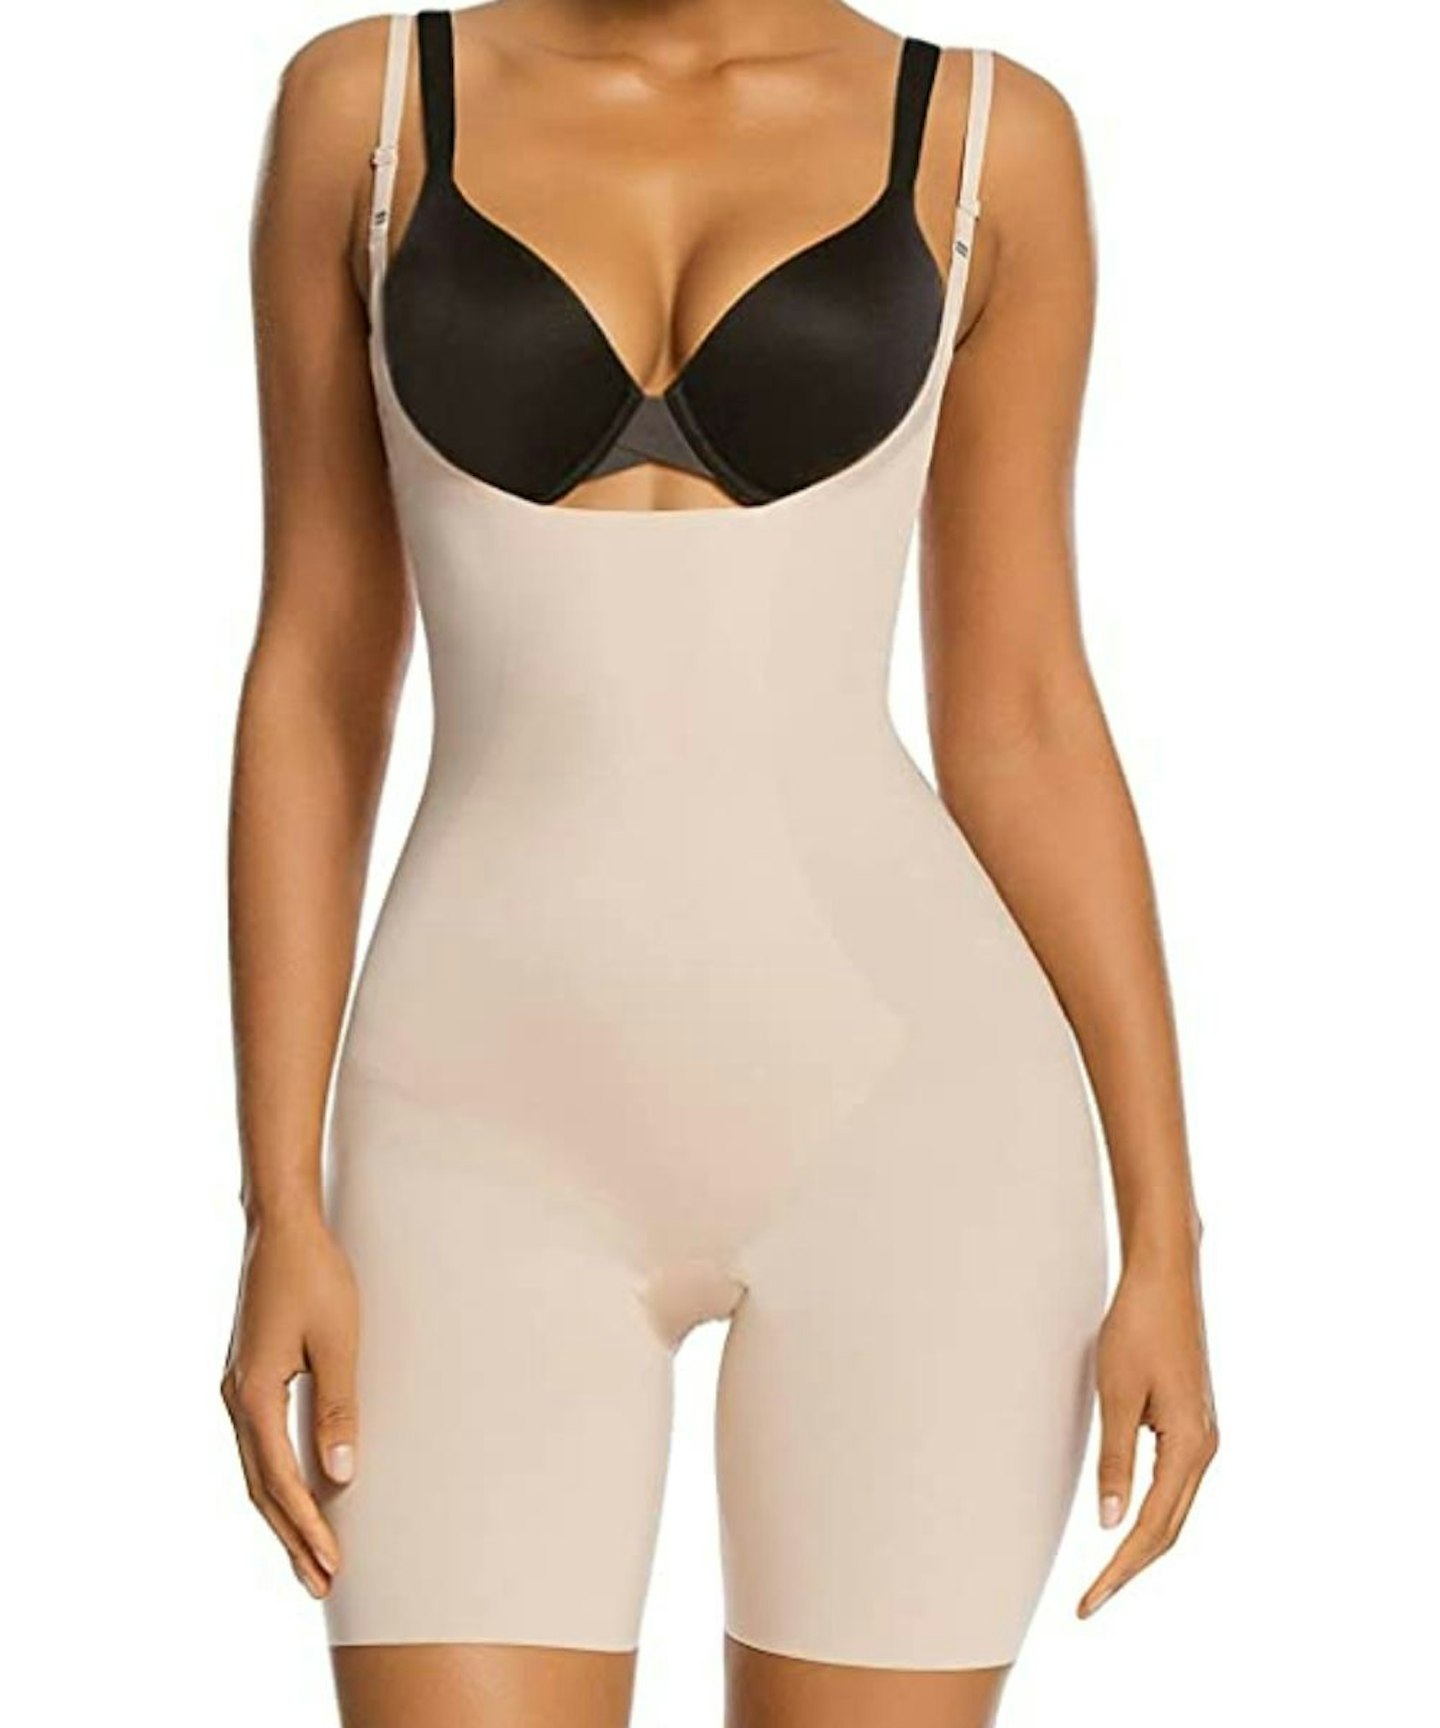 Boostie-Yay Slimming Body with Bra Top by Spanx for $118